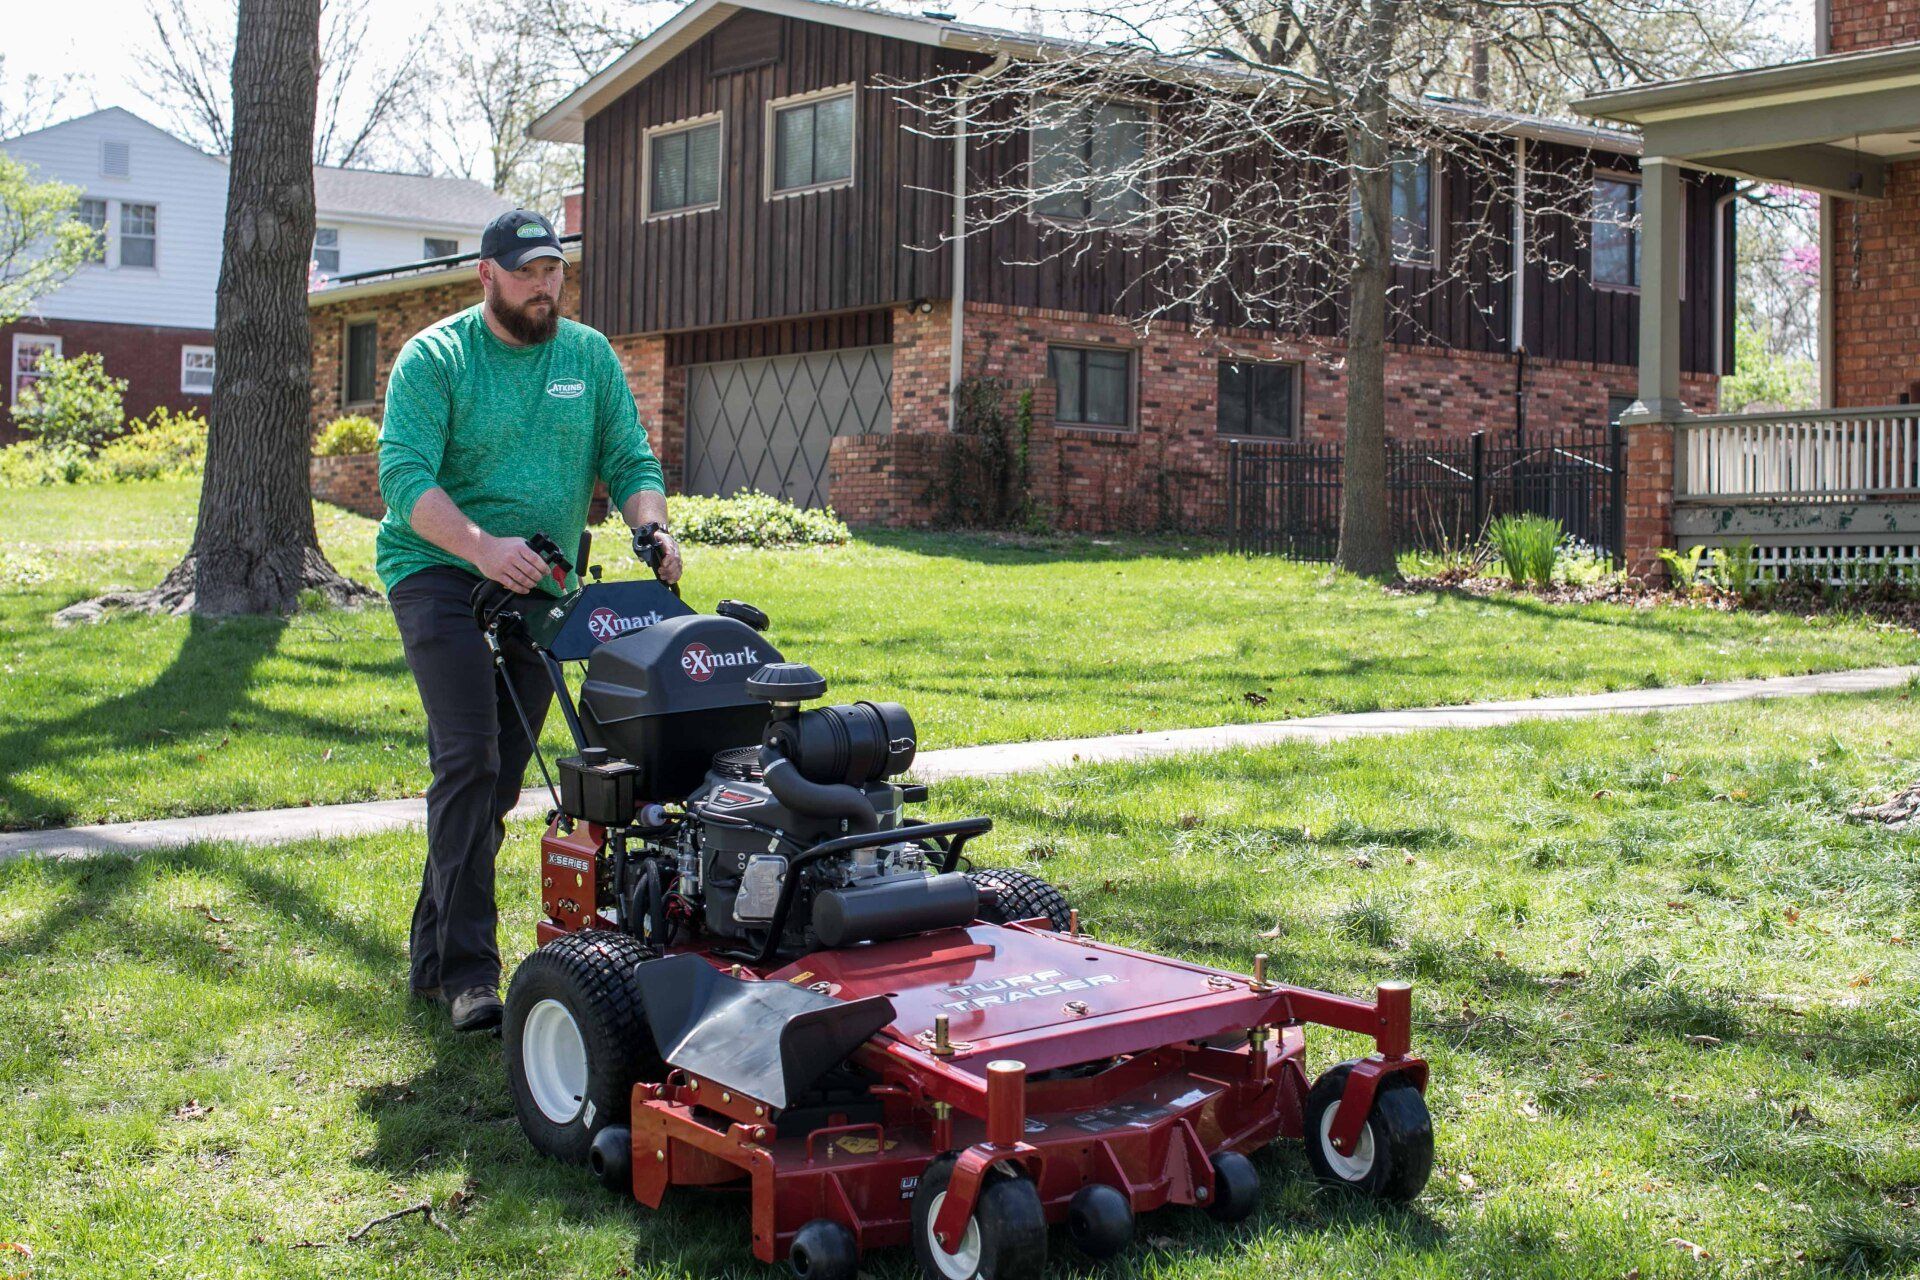 Our Professional Lawn Mowers at Atkins Will Not Stop Until Your Mid-Missouri Lawn is Gorgeous!